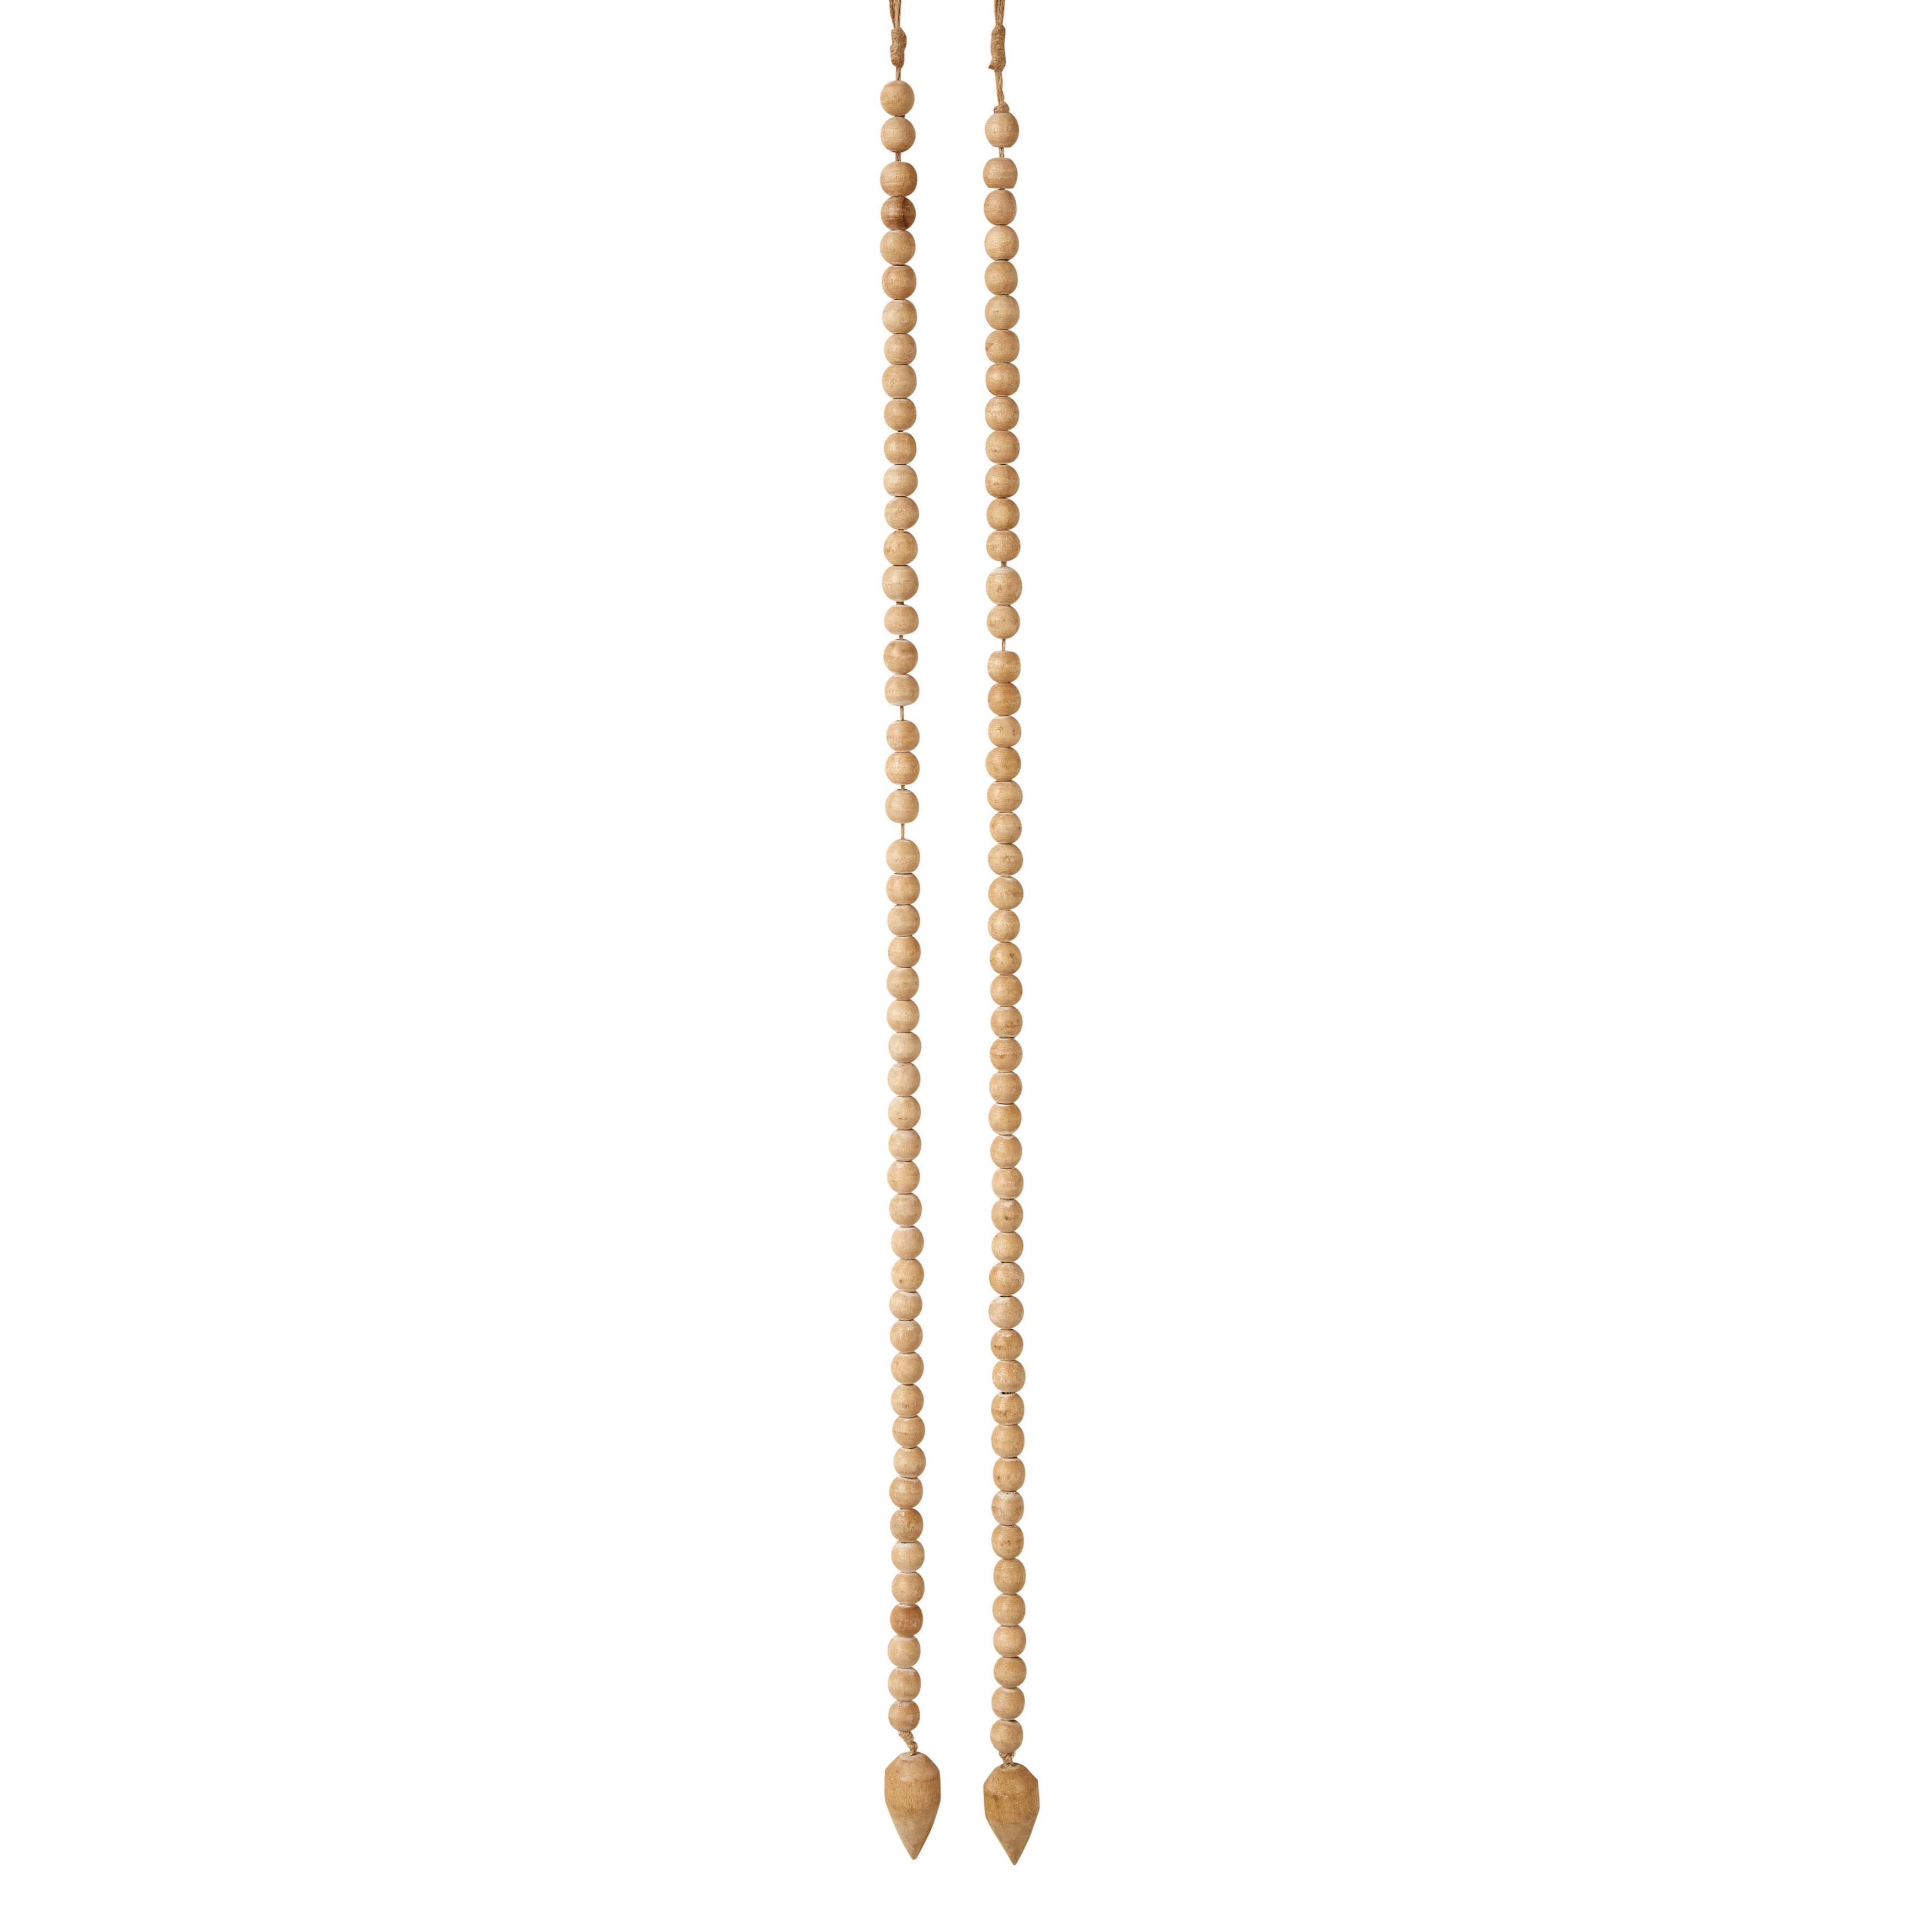 Wood Bead Garland with Pointed Ends - Image 0